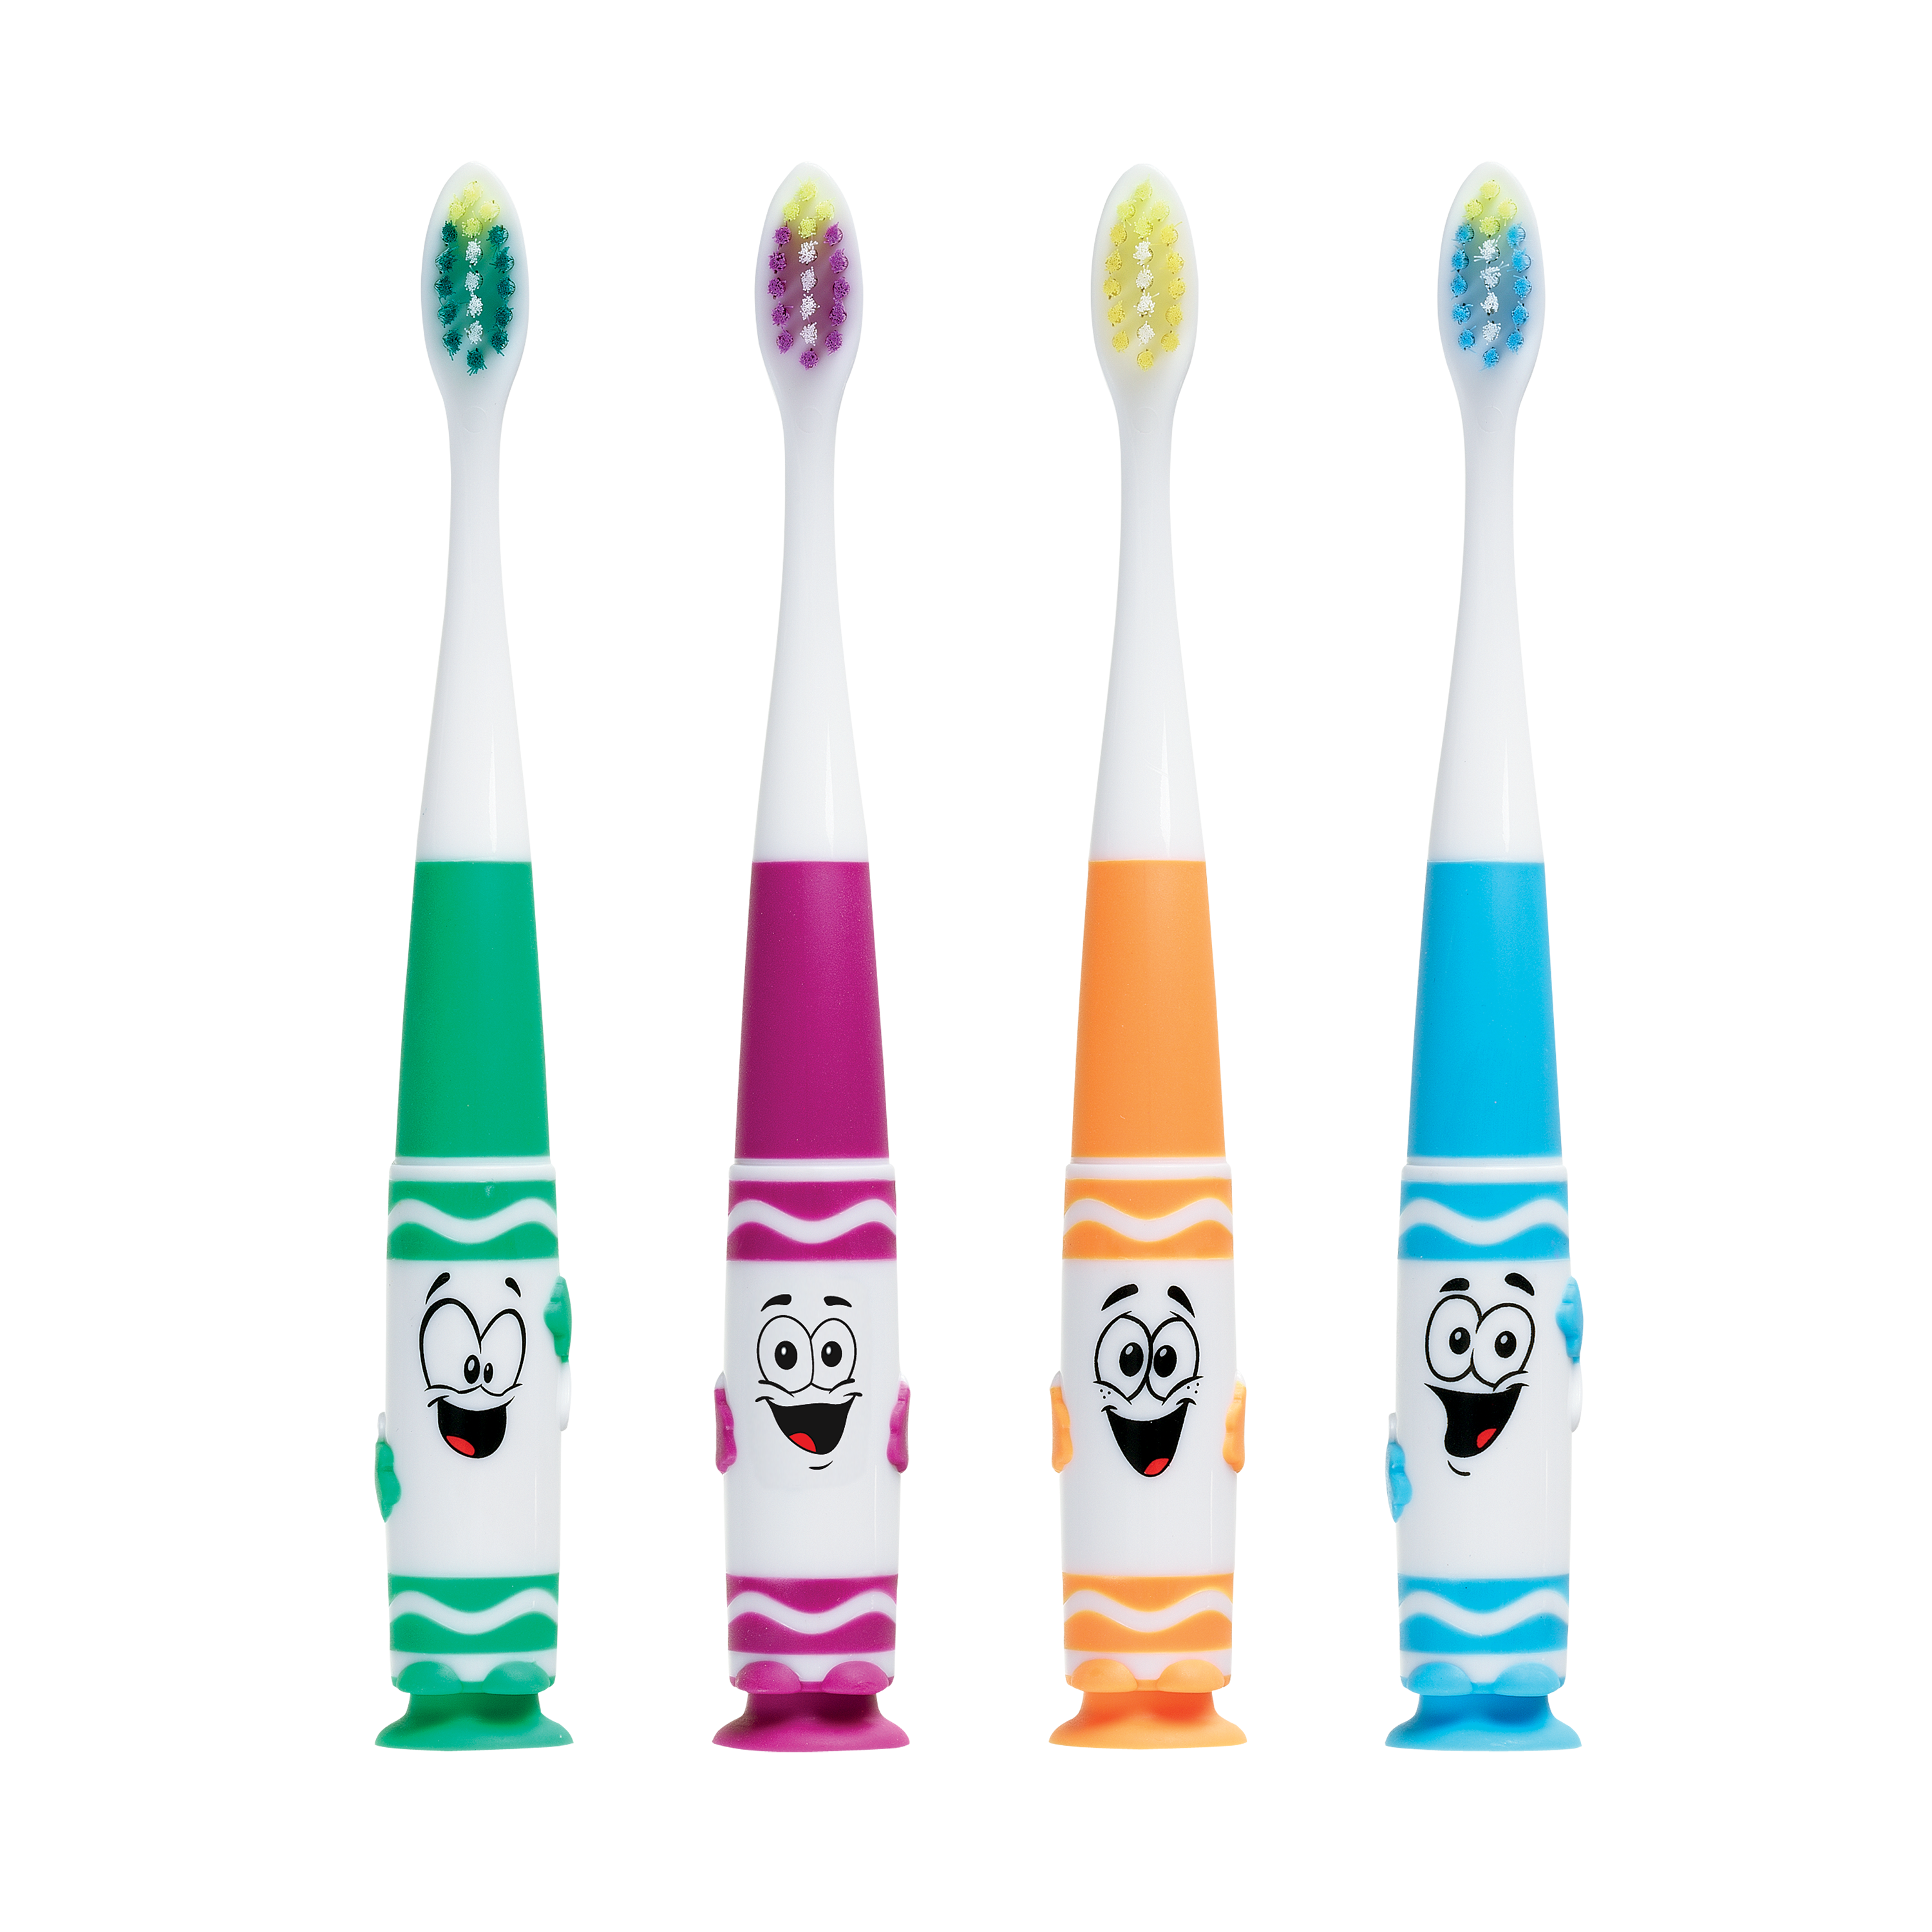 232-Product-Toothbrush-Manual-Crayola-PipSqueaks-naked-4colors.png